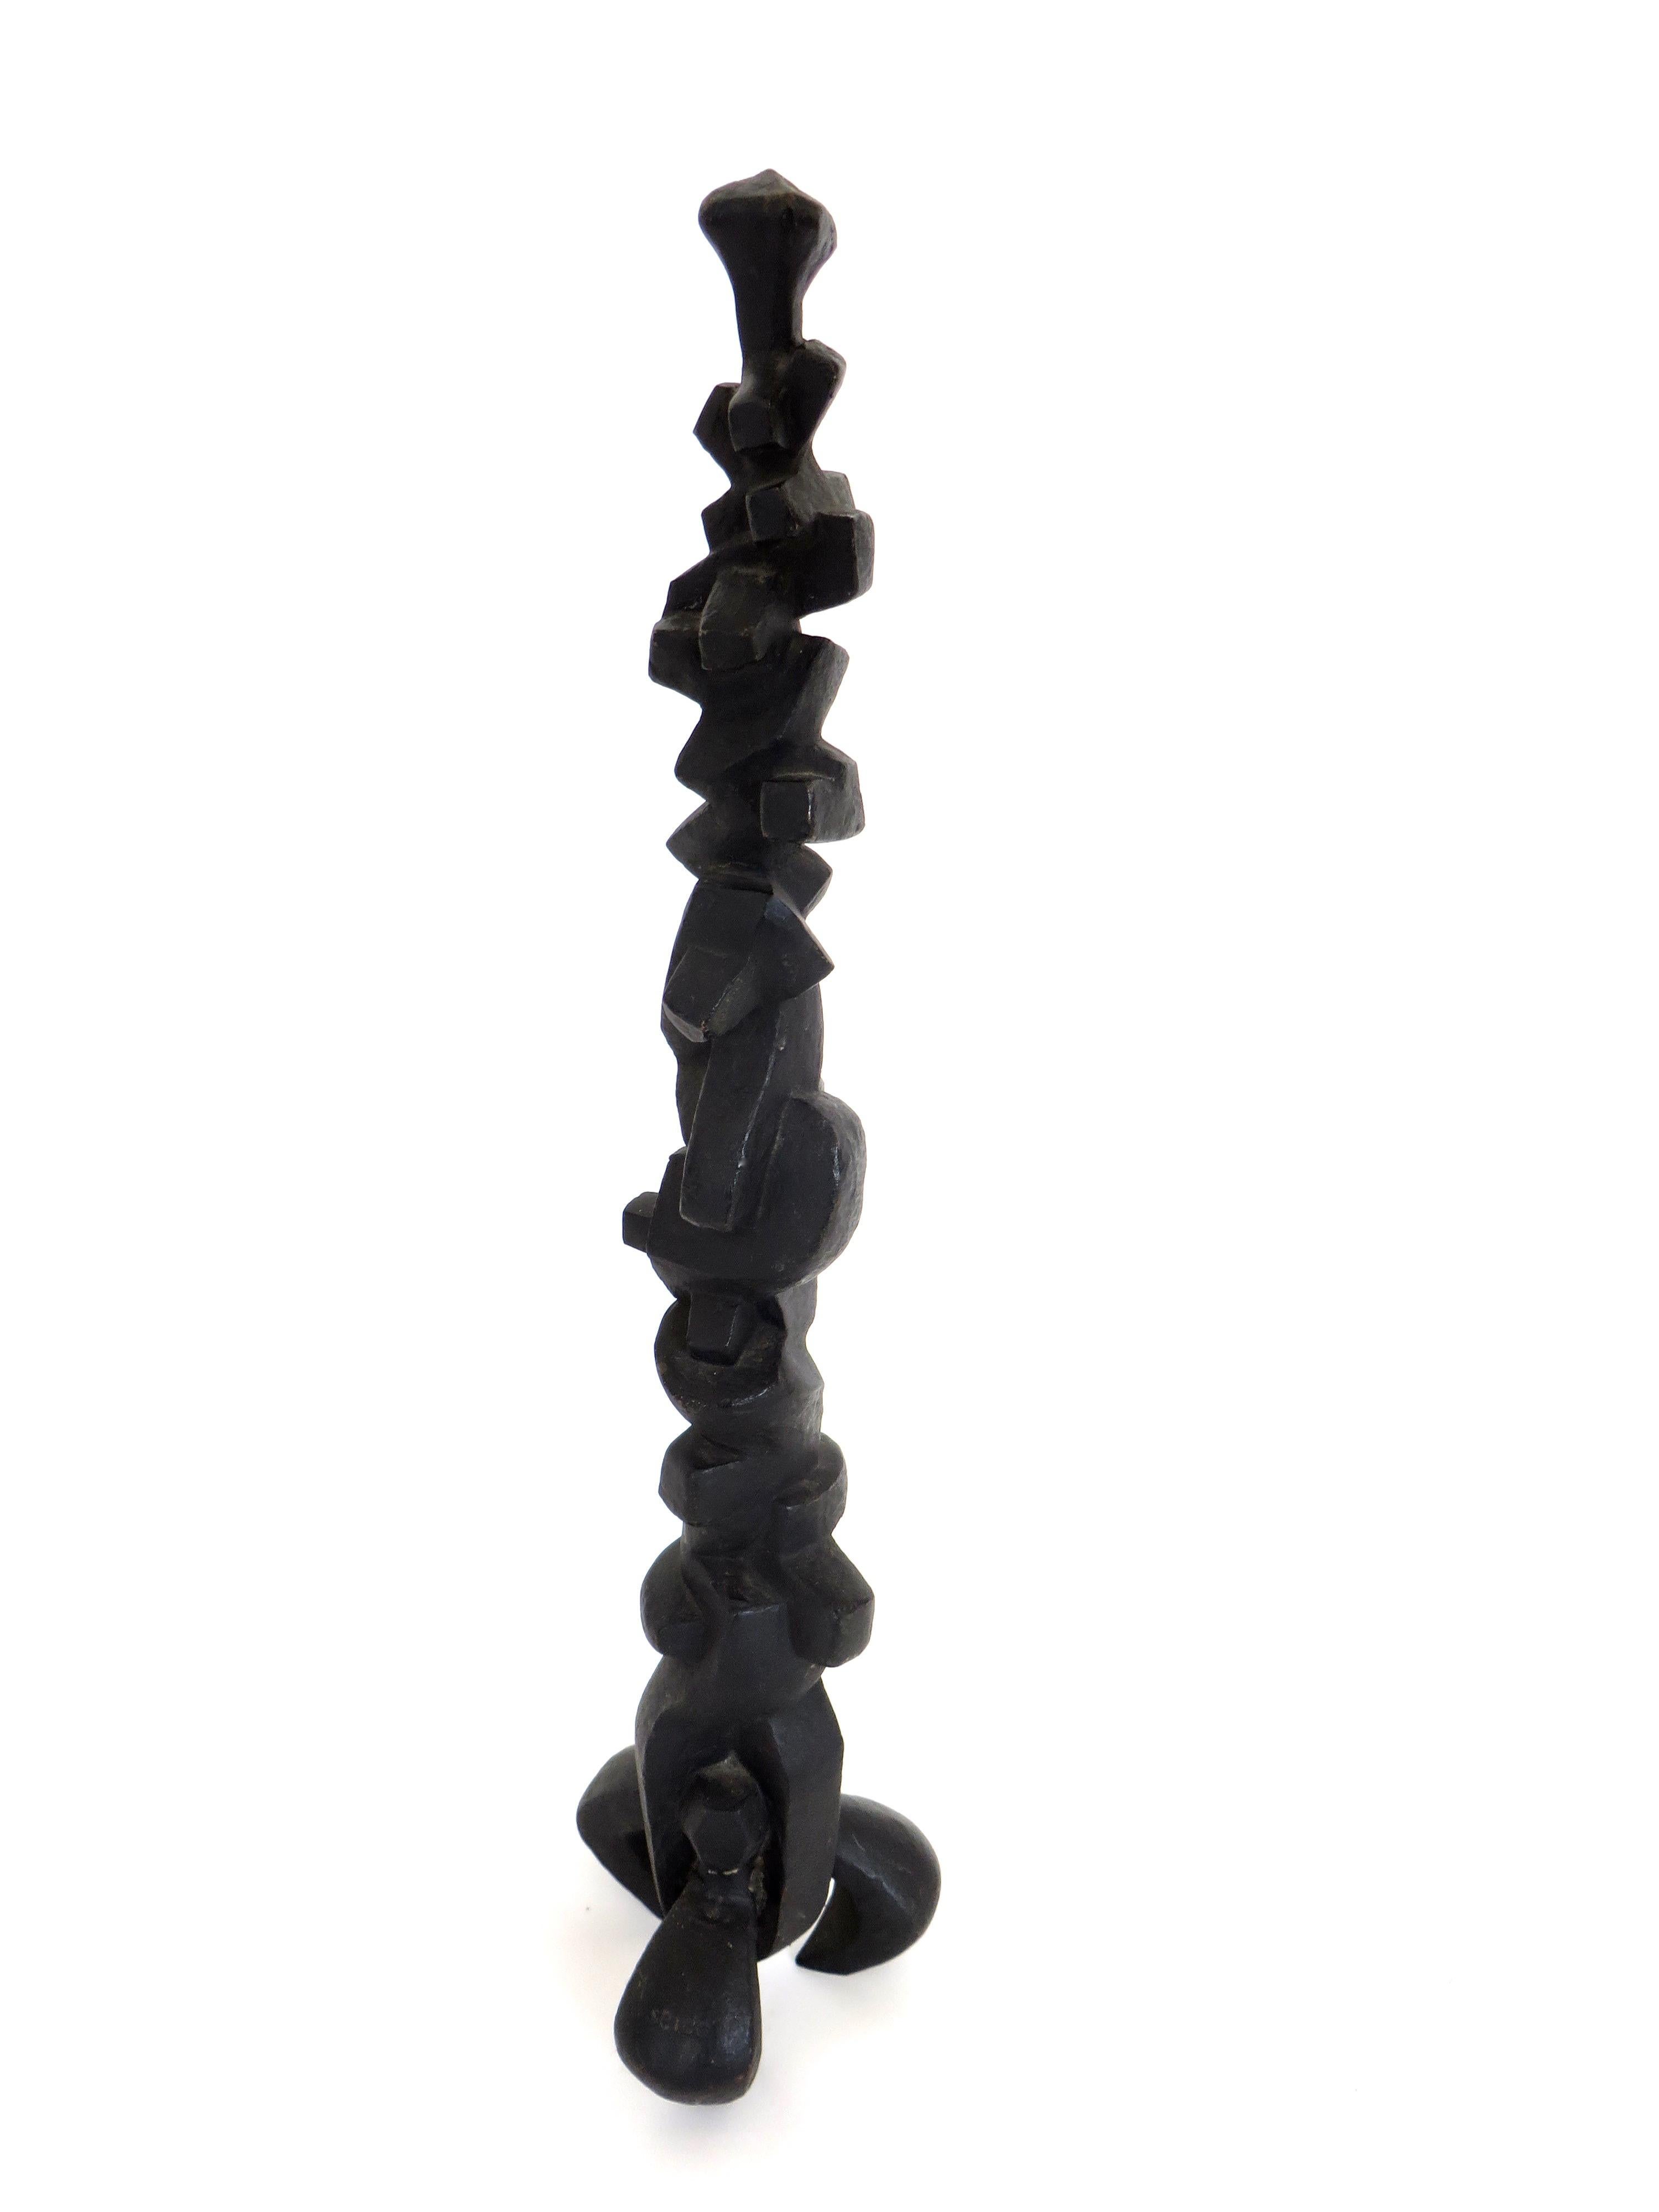 Cast bronze abstract TOTEM sculpture consisting of stacking abstract forms, some geometric, some interlocking.
Heavily blackened bronze sculpture, consisting of abstracted forms, ending on three feet.
Signed on one of the feet. Unreadable